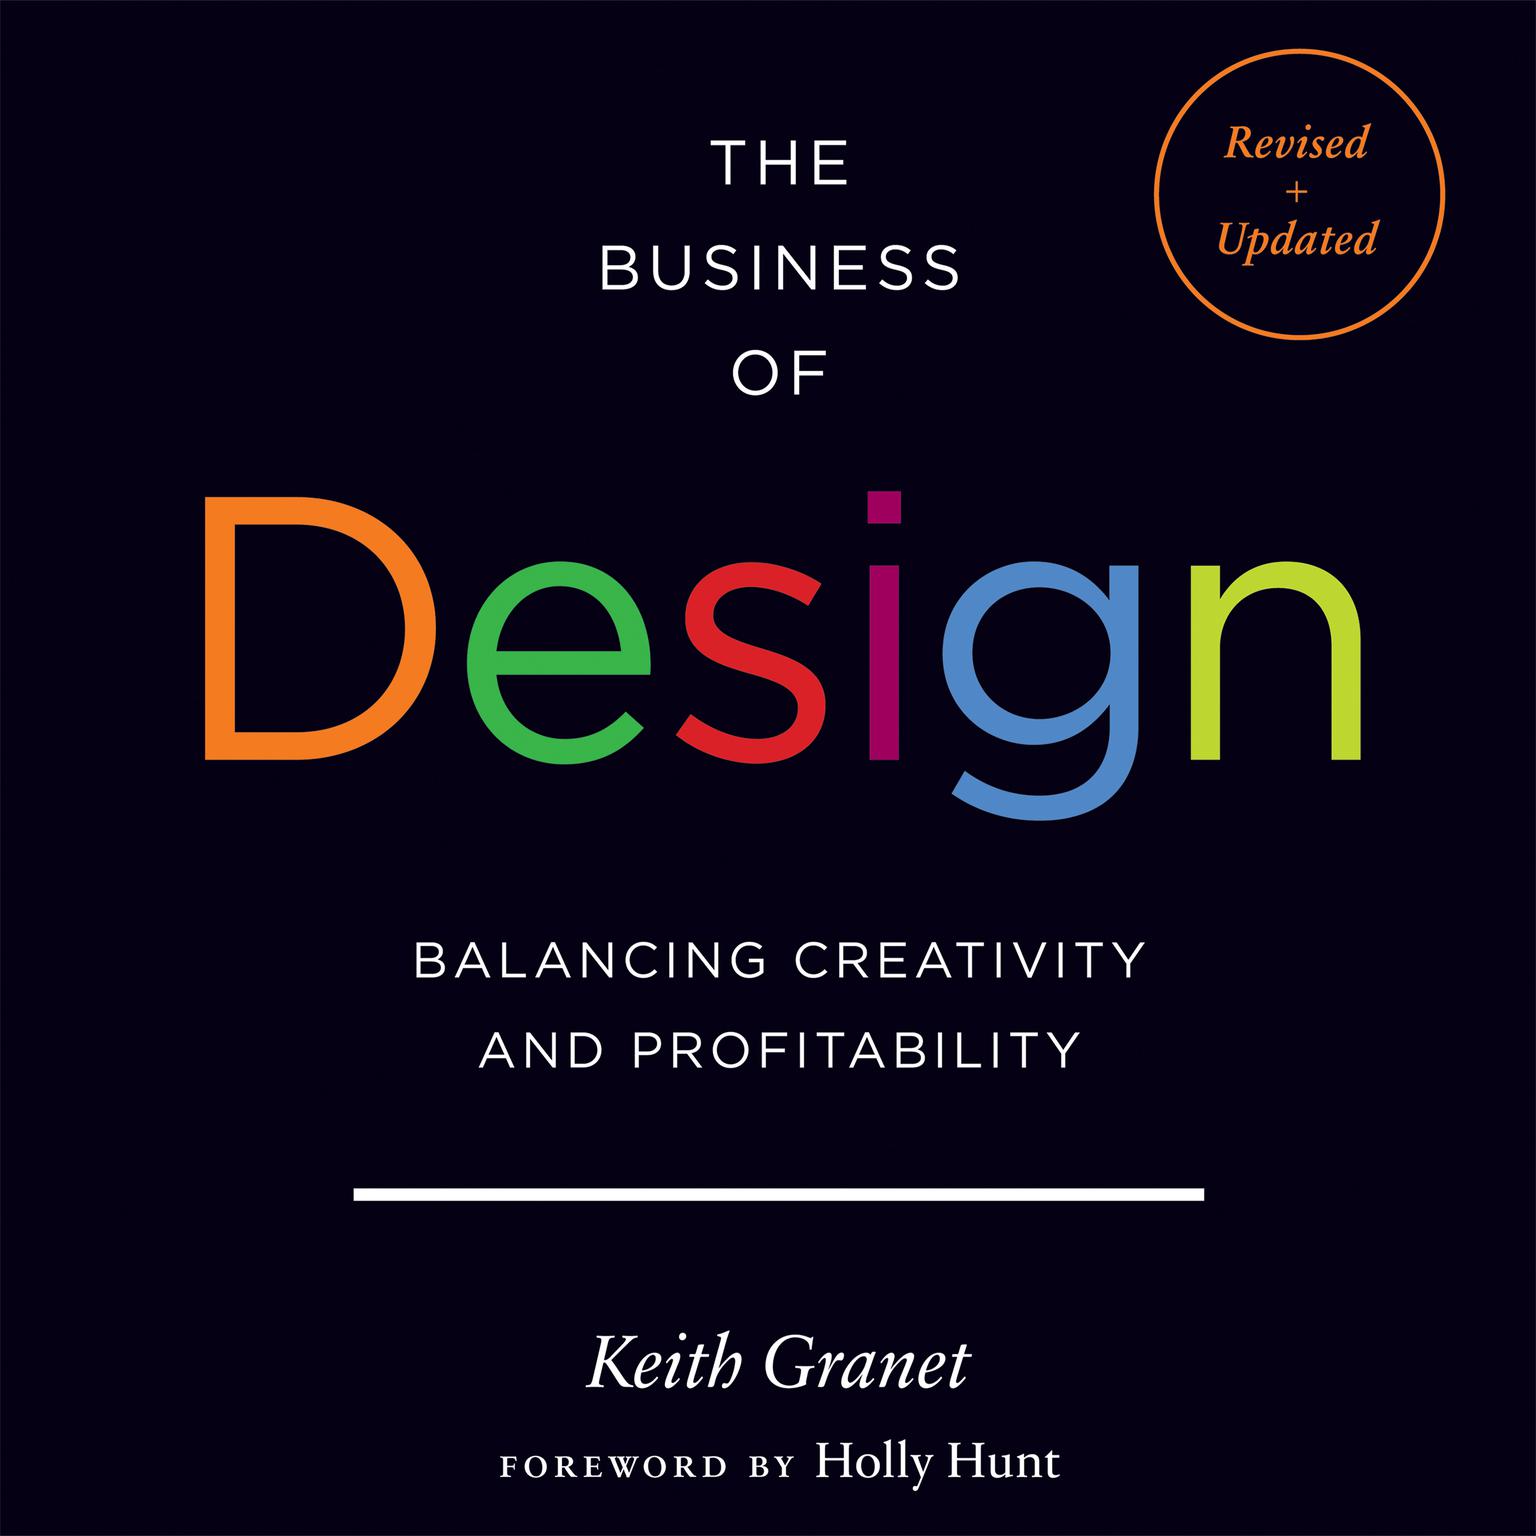 The Business of Design: Balancing Creativity and Profitability Audiobook, by Keith Granet